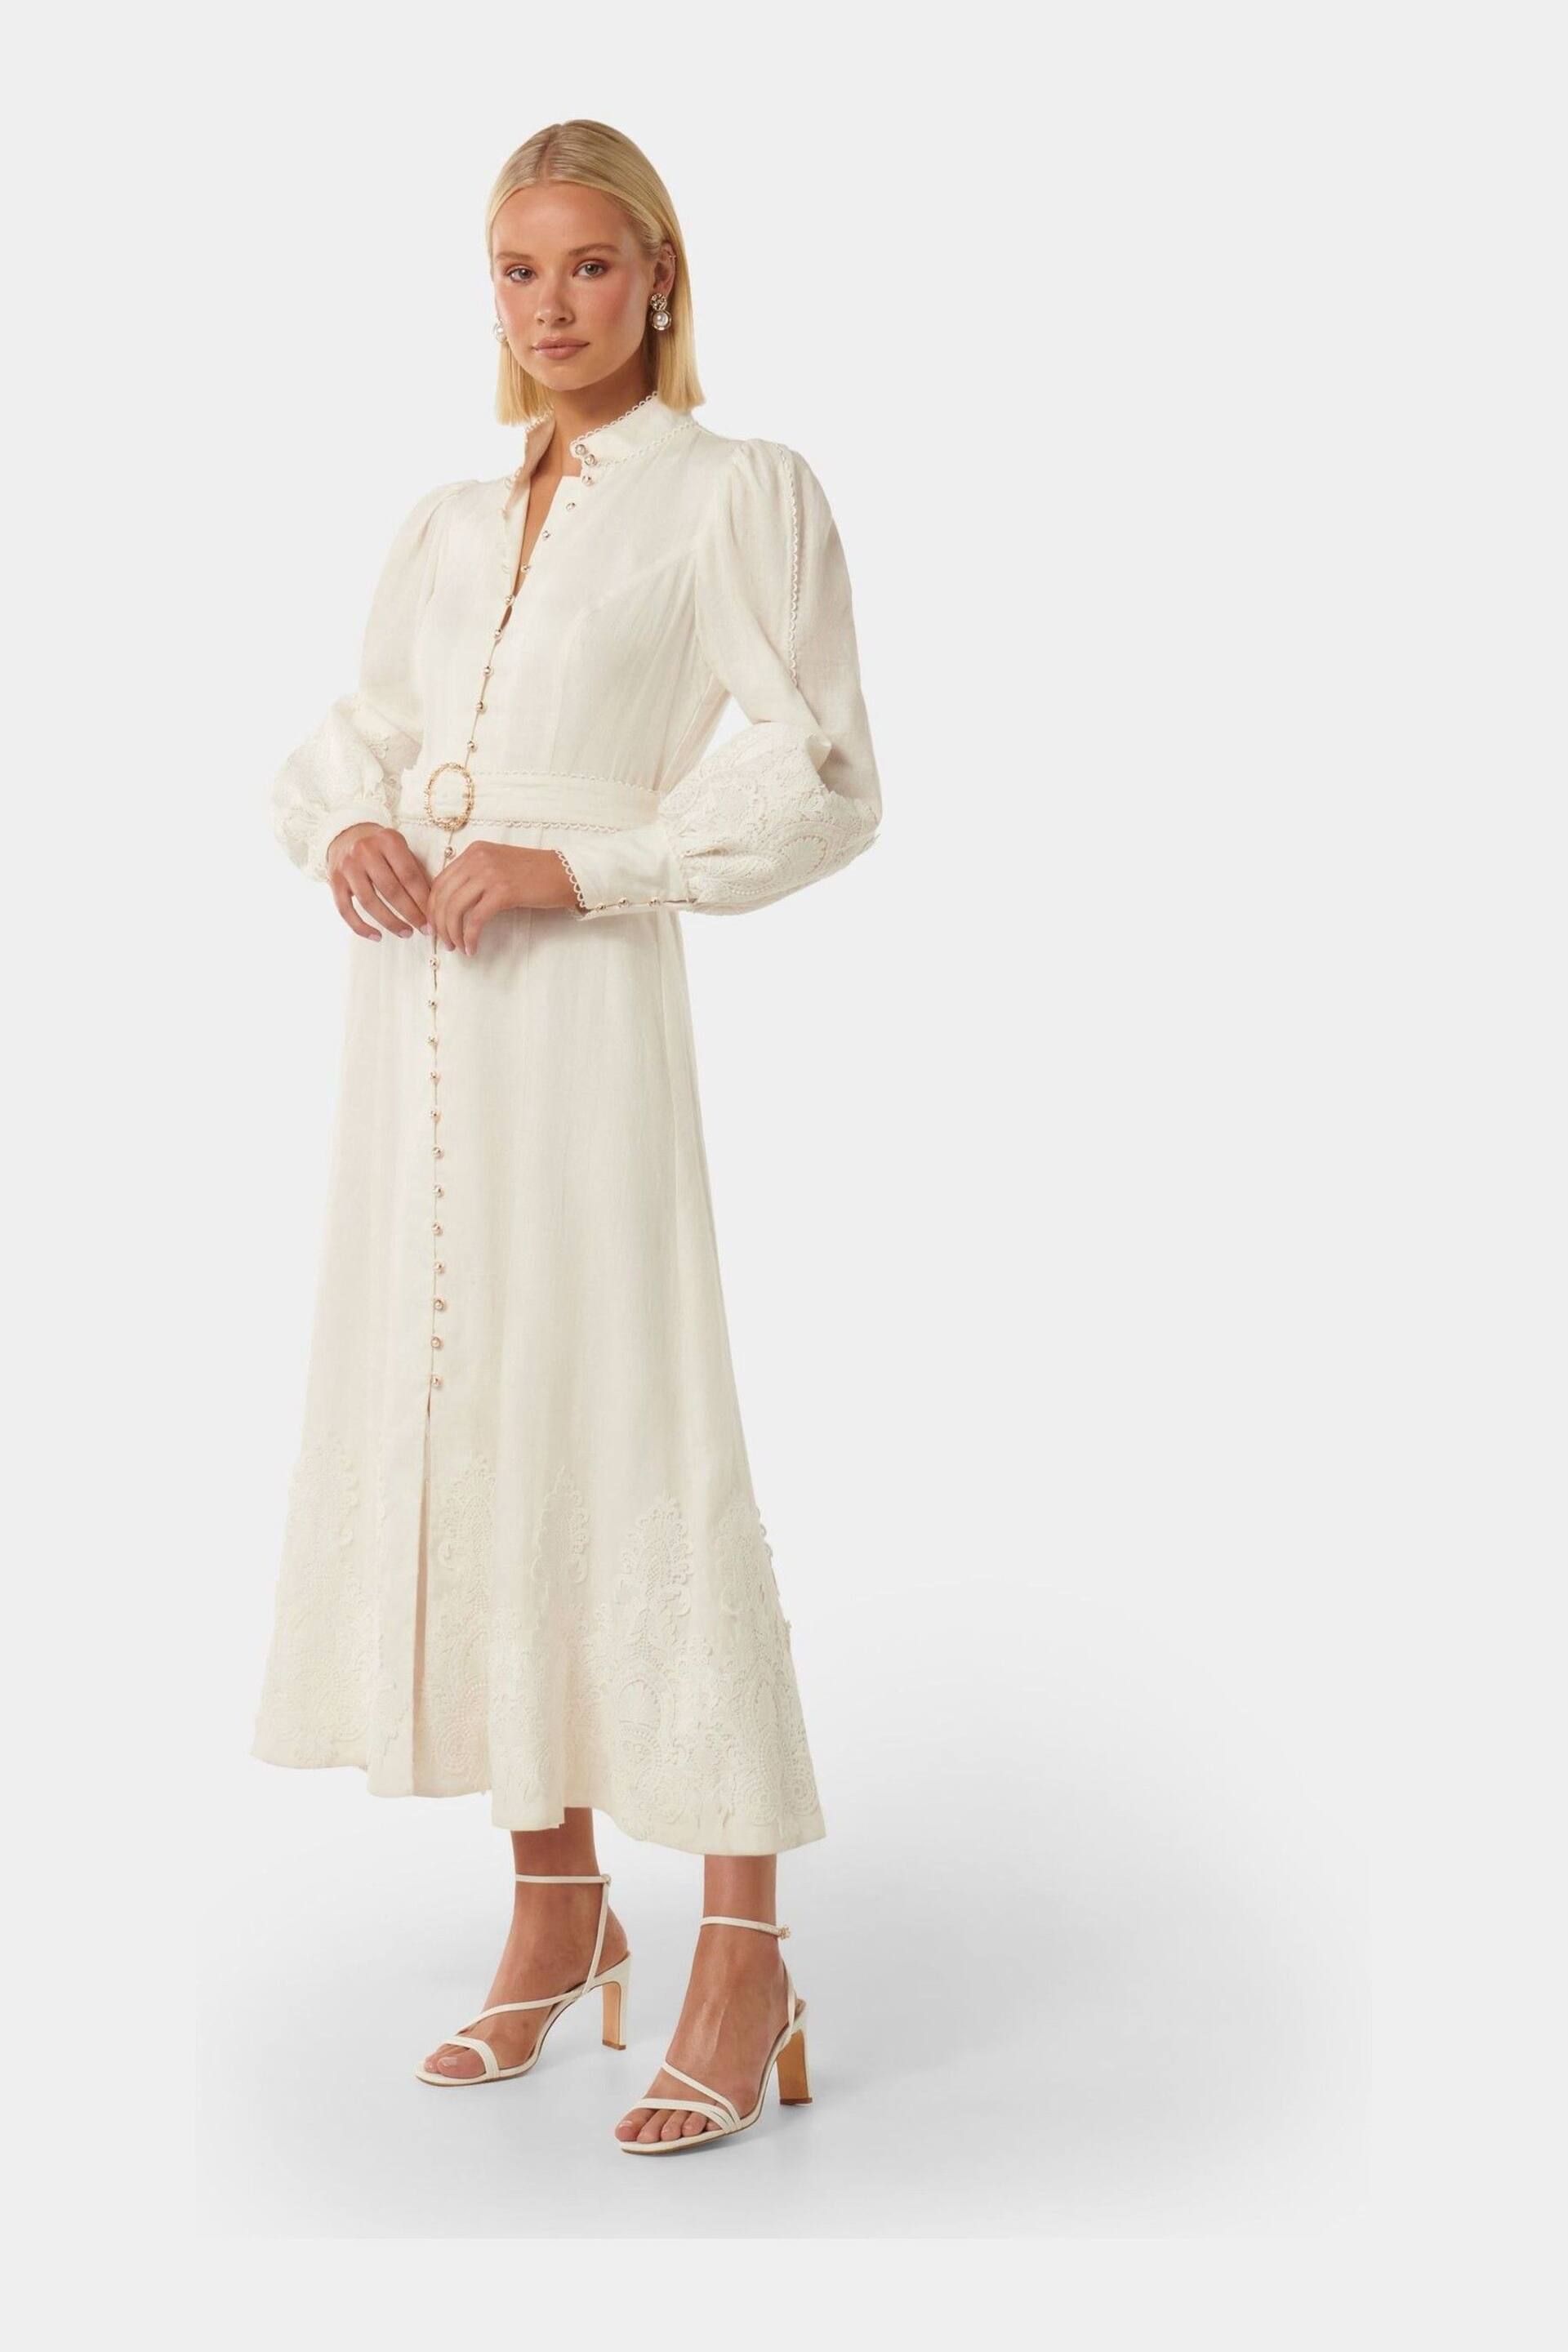 Forever New White Pure Linen Allegra Lace Detail Midi Dress - Image 3 of 4